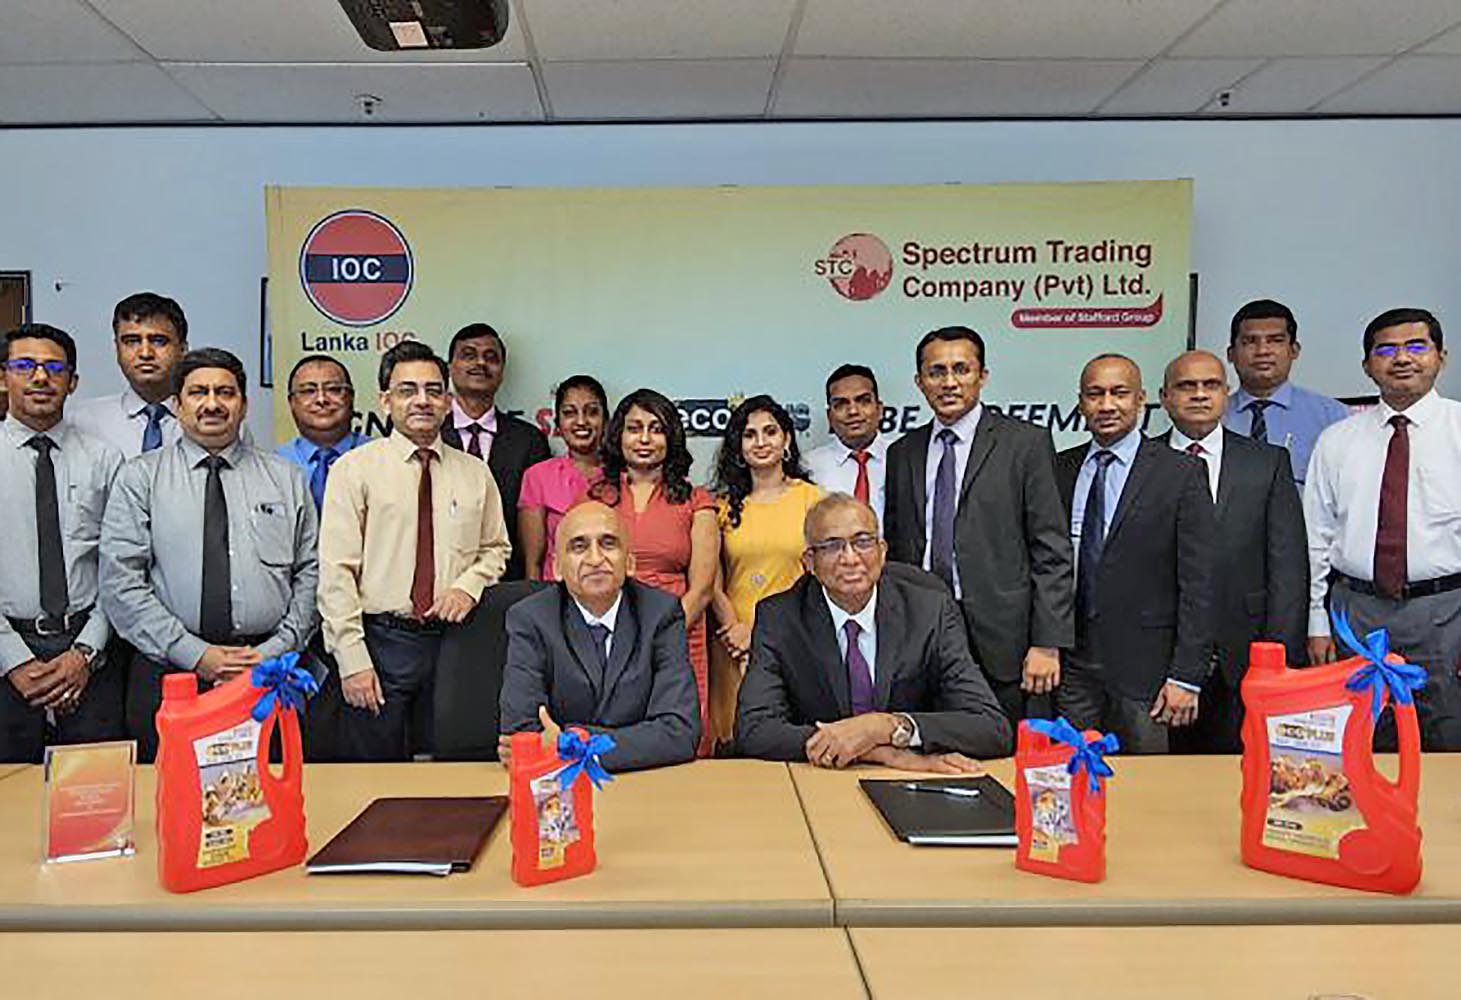 Spectrum Trading and Lanka IOC introduce co-branded lubricant